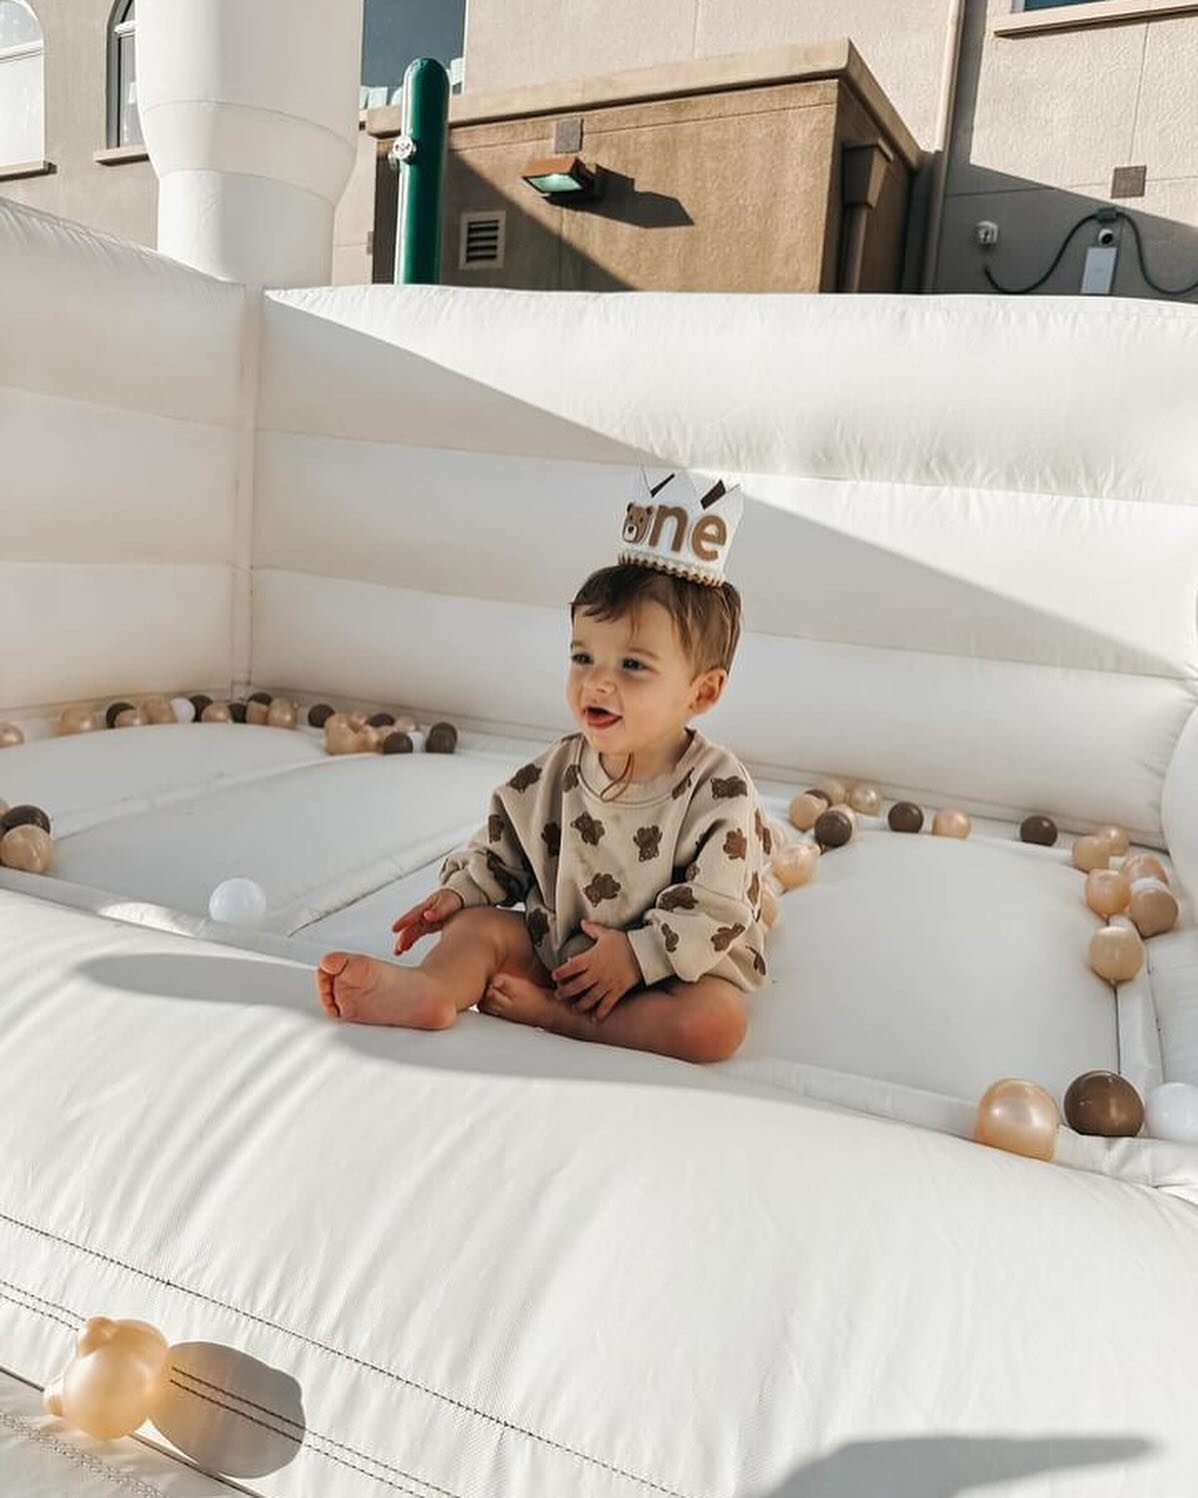 The mini is perfect for little kids &amp; little spaces. At just 8x8ft we can fit this cute bounce house in most spaces including inside homes &amp; garages! 🤩 

We have the mini available in white &amp; pink 🎉

Huge thank you to @themamabirdblog f